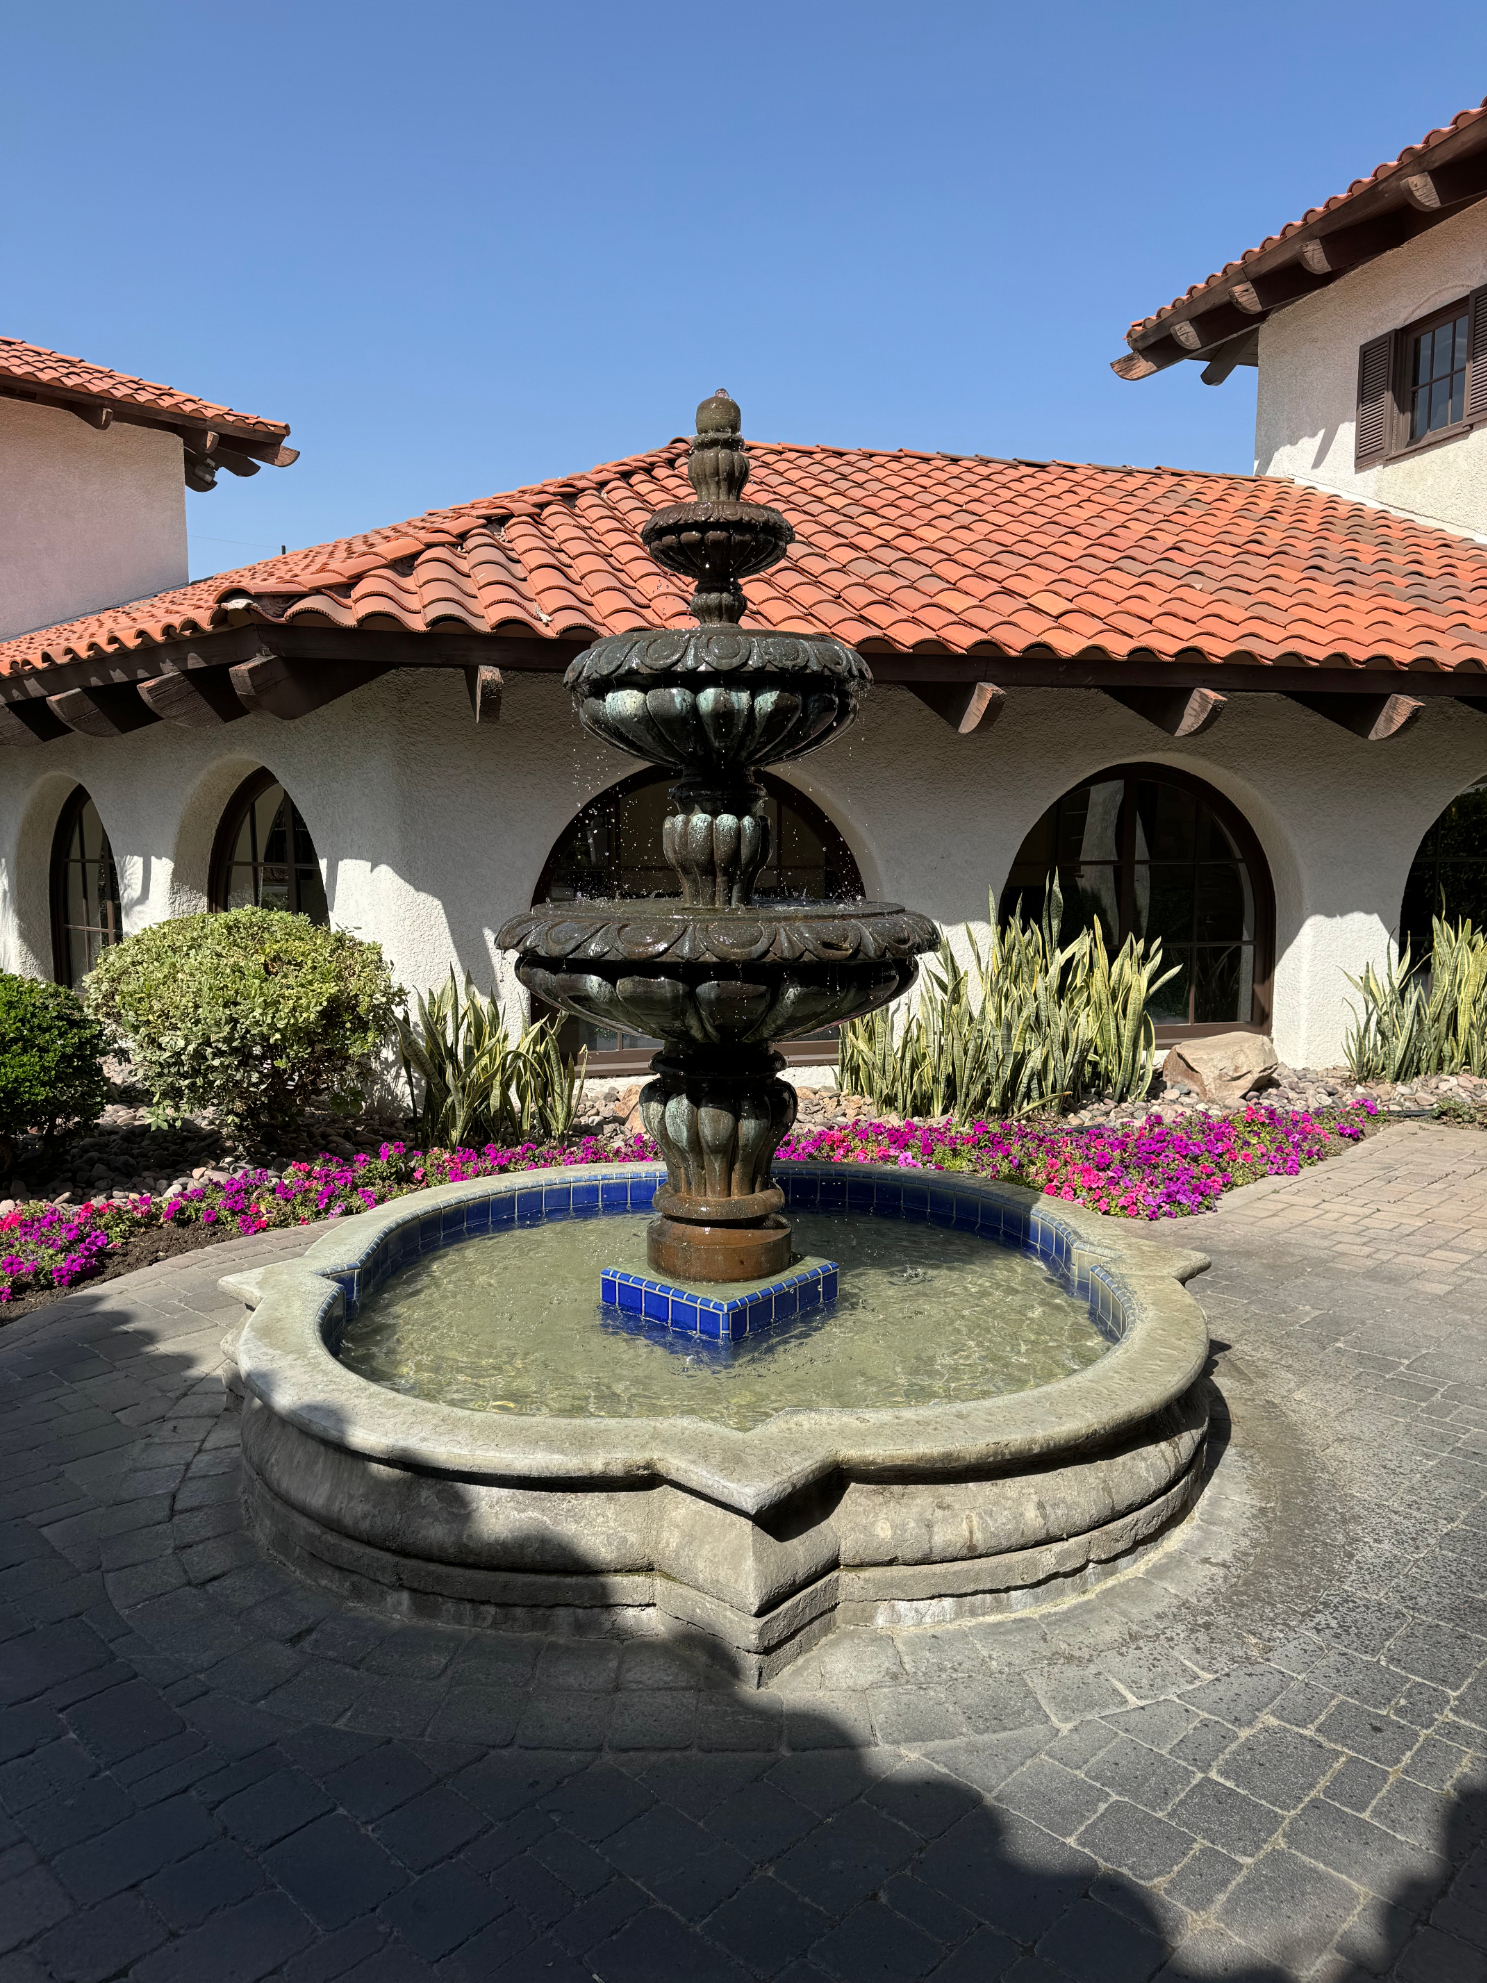 Multi-tiered fountain in front of a Spanish-style building, surrounded by purple flowers